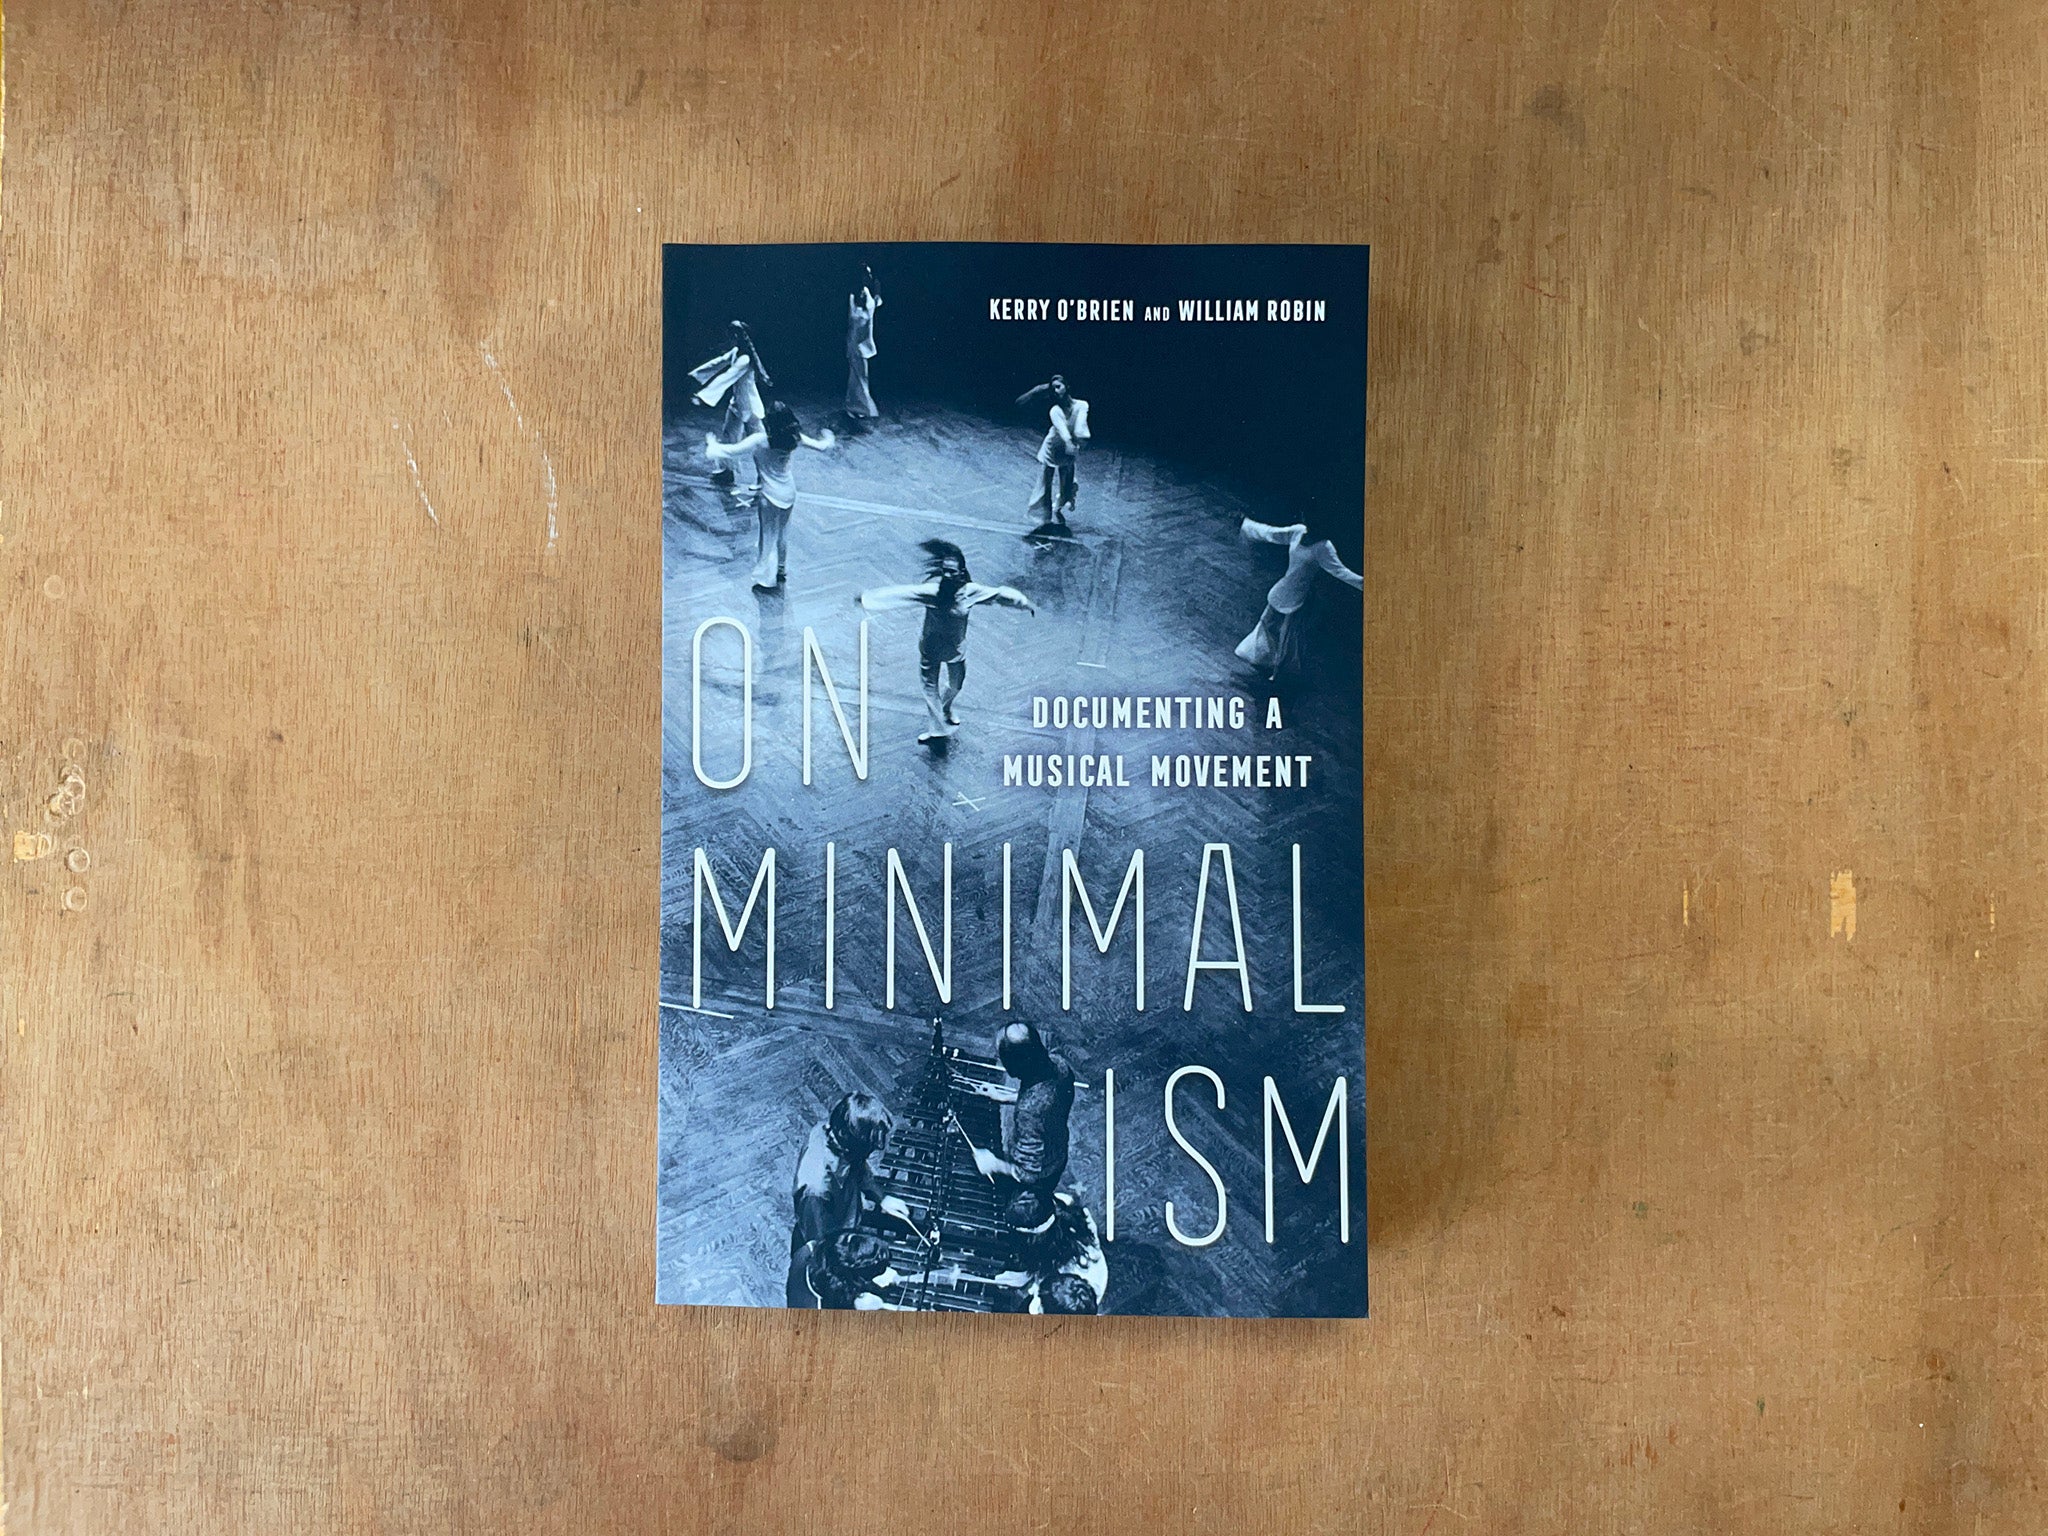 ON MINIMALISM: DOCUMENTING A MUSICAL MOVEMENT by Kerry O'Brien & William Robin